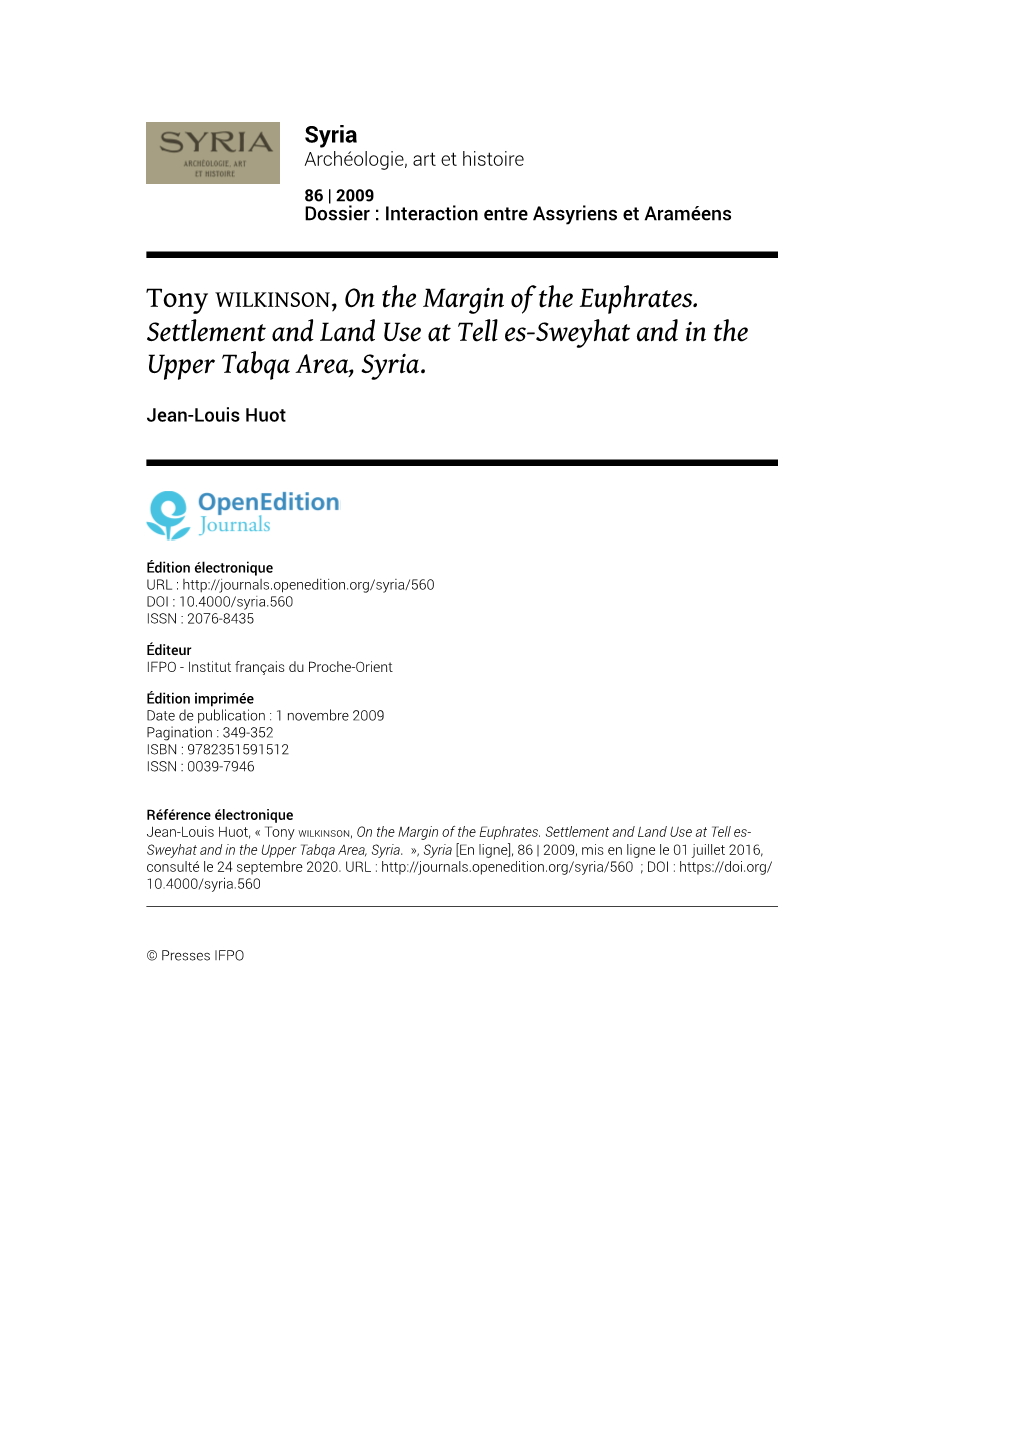 Tony WILKINSON, on the Margin of the Euphrates. Settlement and Land Use at Tell Es‑Sweyhat and in the Upper Tabqa Area, Syria